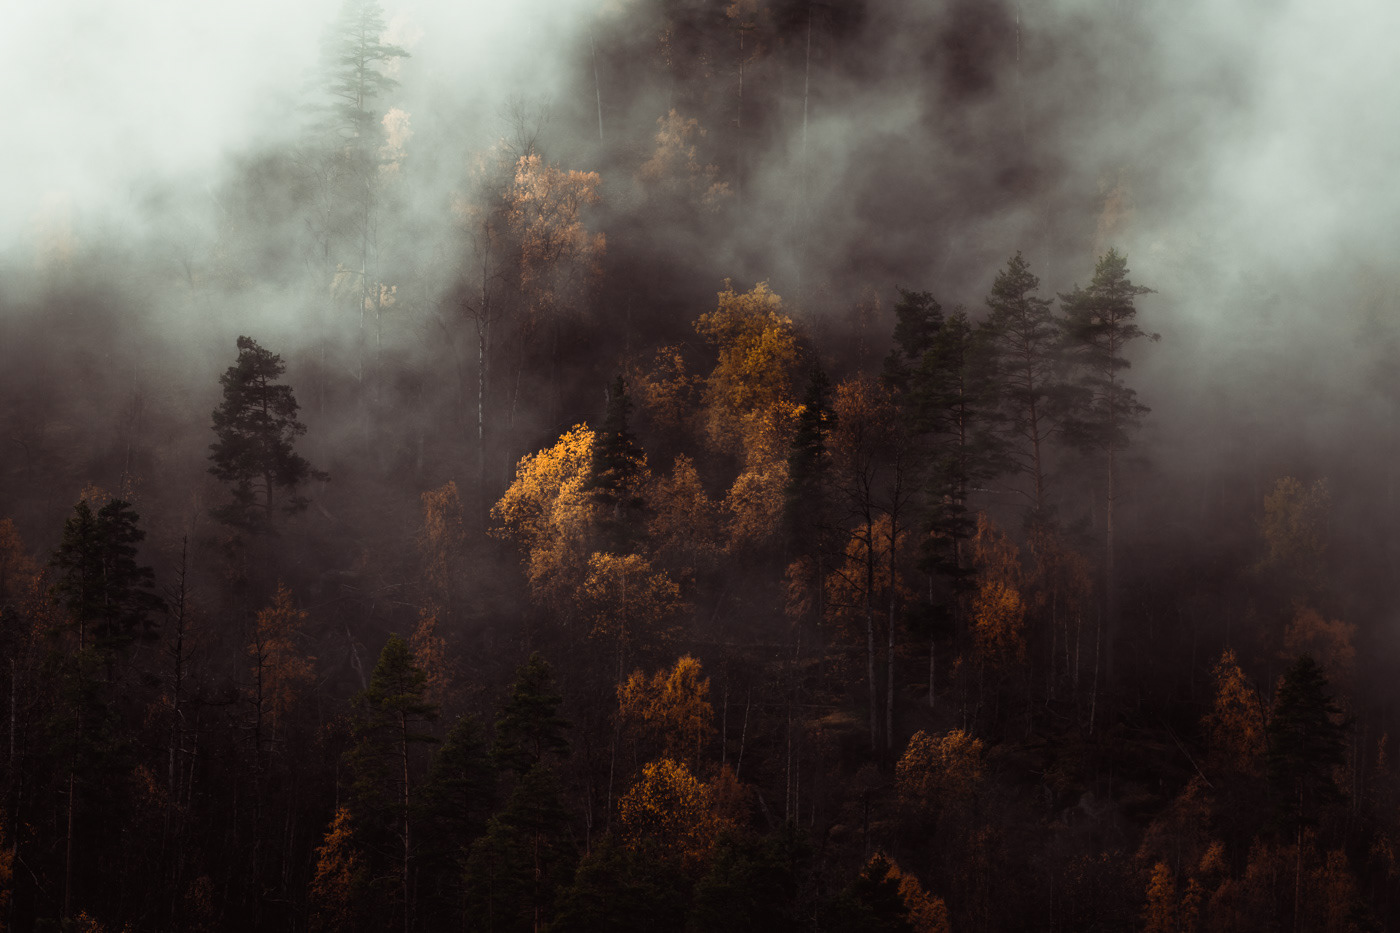 Moody forest fog mist waterfall norway mountains MORNING autumn Fall